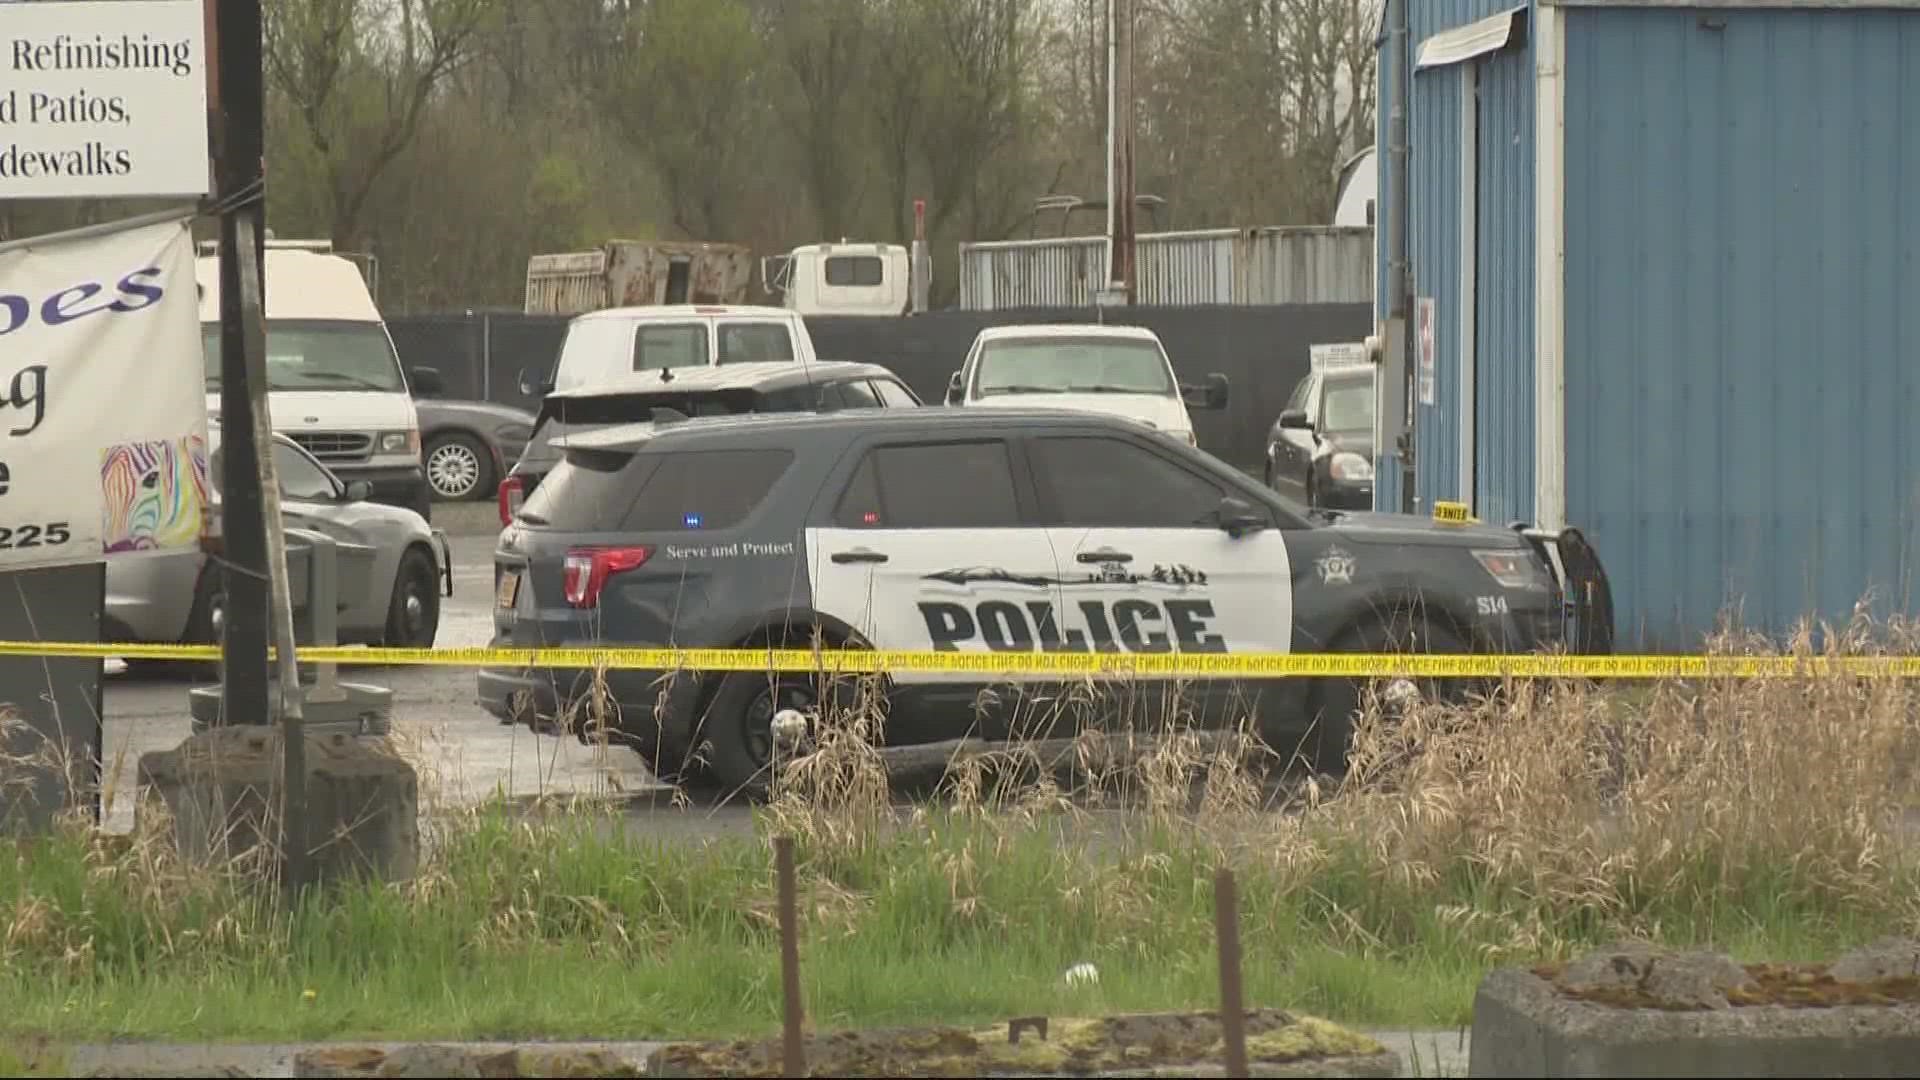 A man was shot and killed by law enforcement at a tow yard in Scappoose on Thursday morning, according to the Washington County Sheriff's Office.